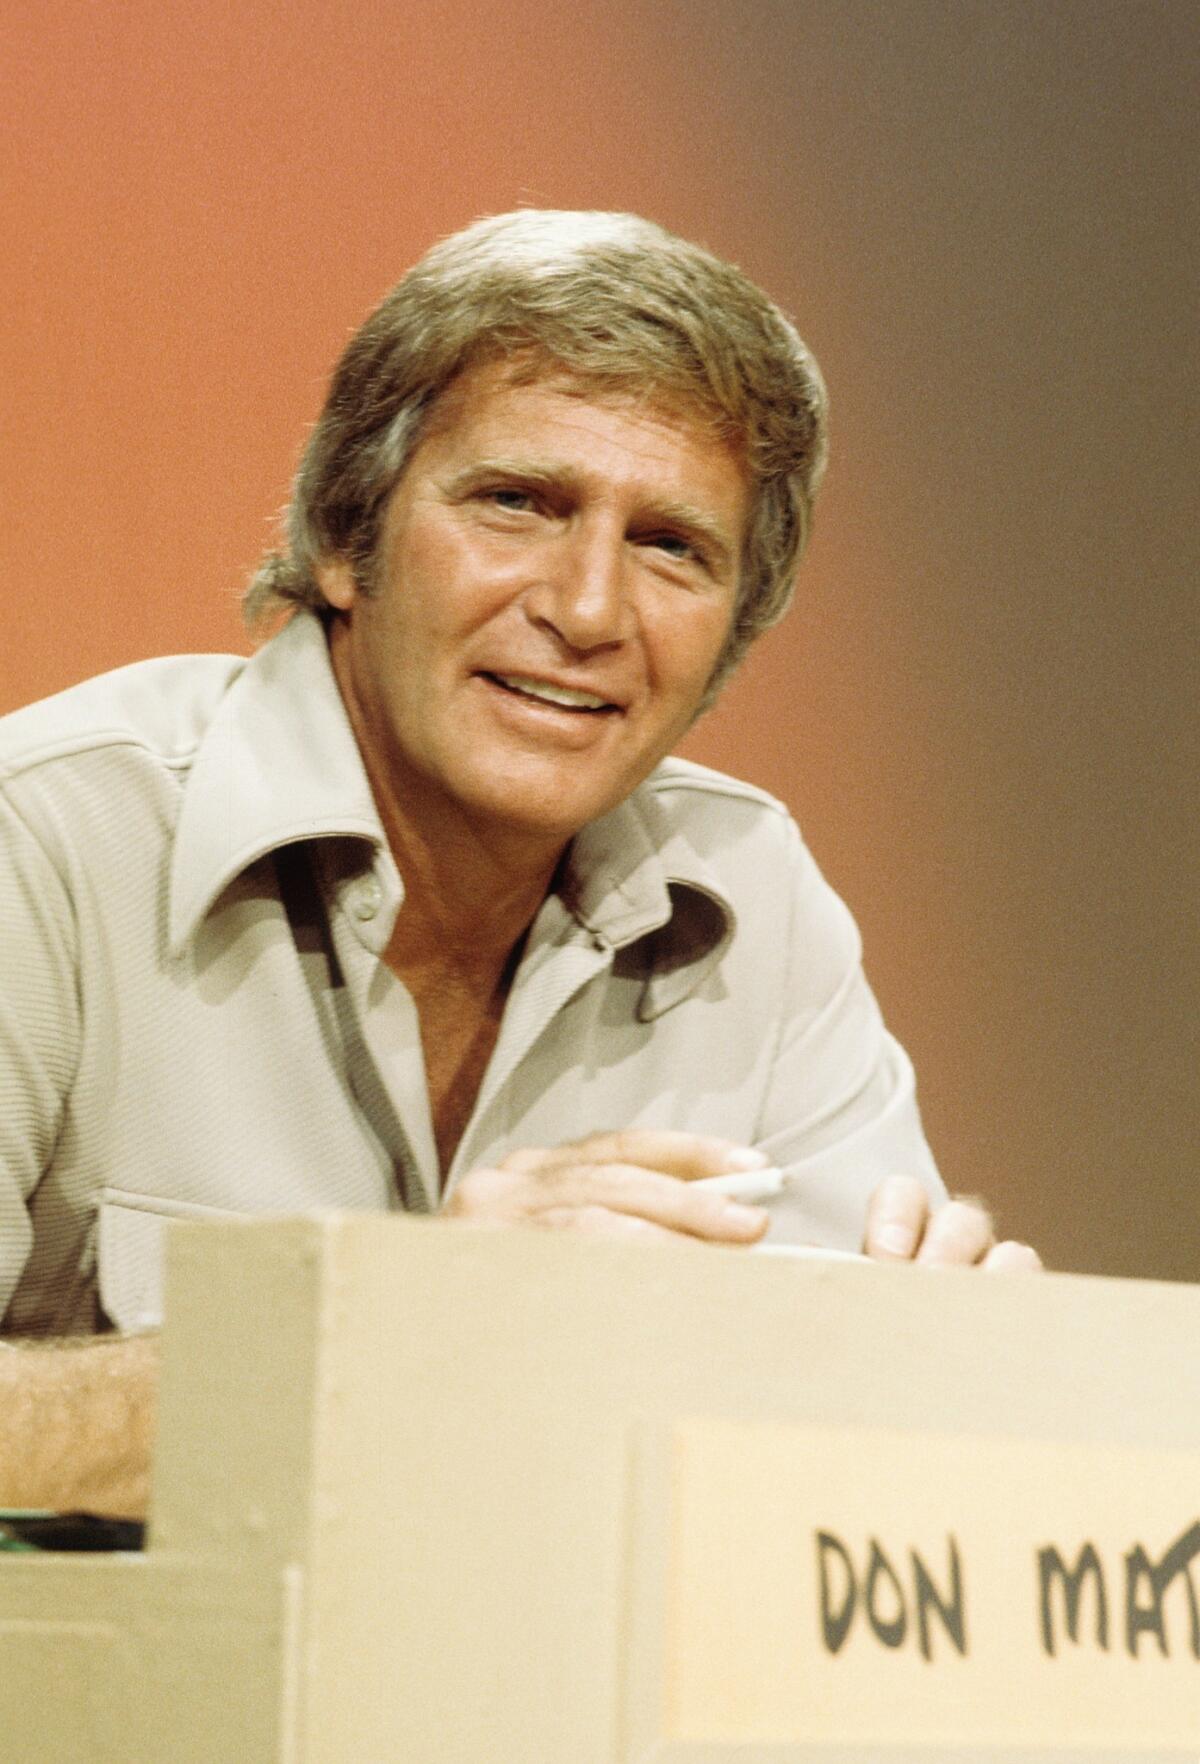 Don Matheson, shown in 1975, starred on "Land of the Giants." His earliest TV credits include appearances on "The Alfred Hitchcock Hour" and "McHale's Navy" in 1962.